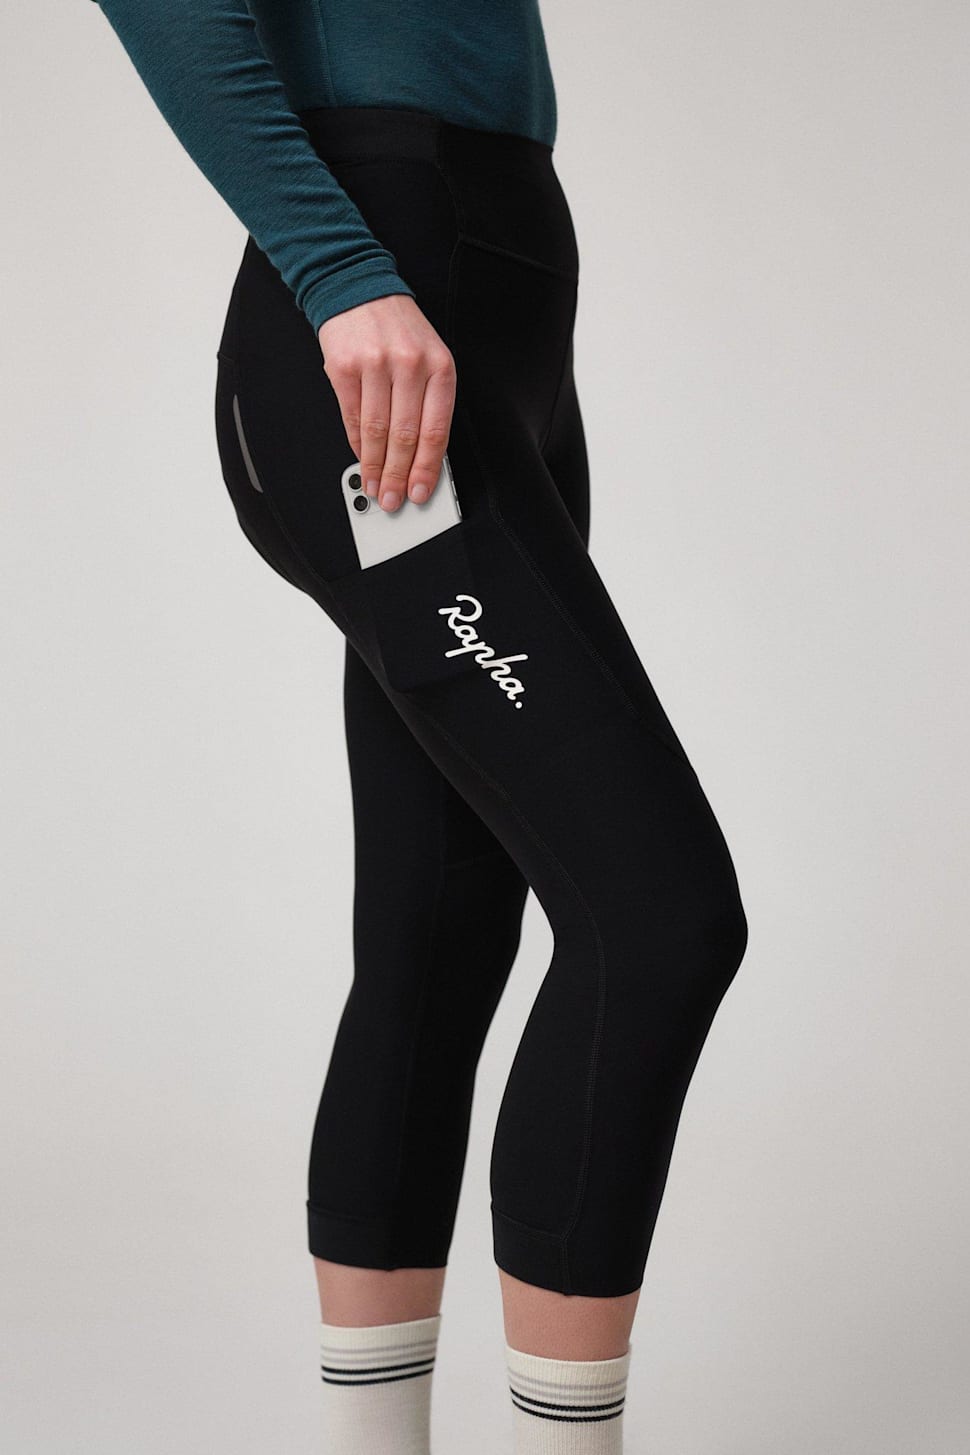 Women's 3/4 Tights | Women's 3/4 Tights For Cold Weather Cycling 